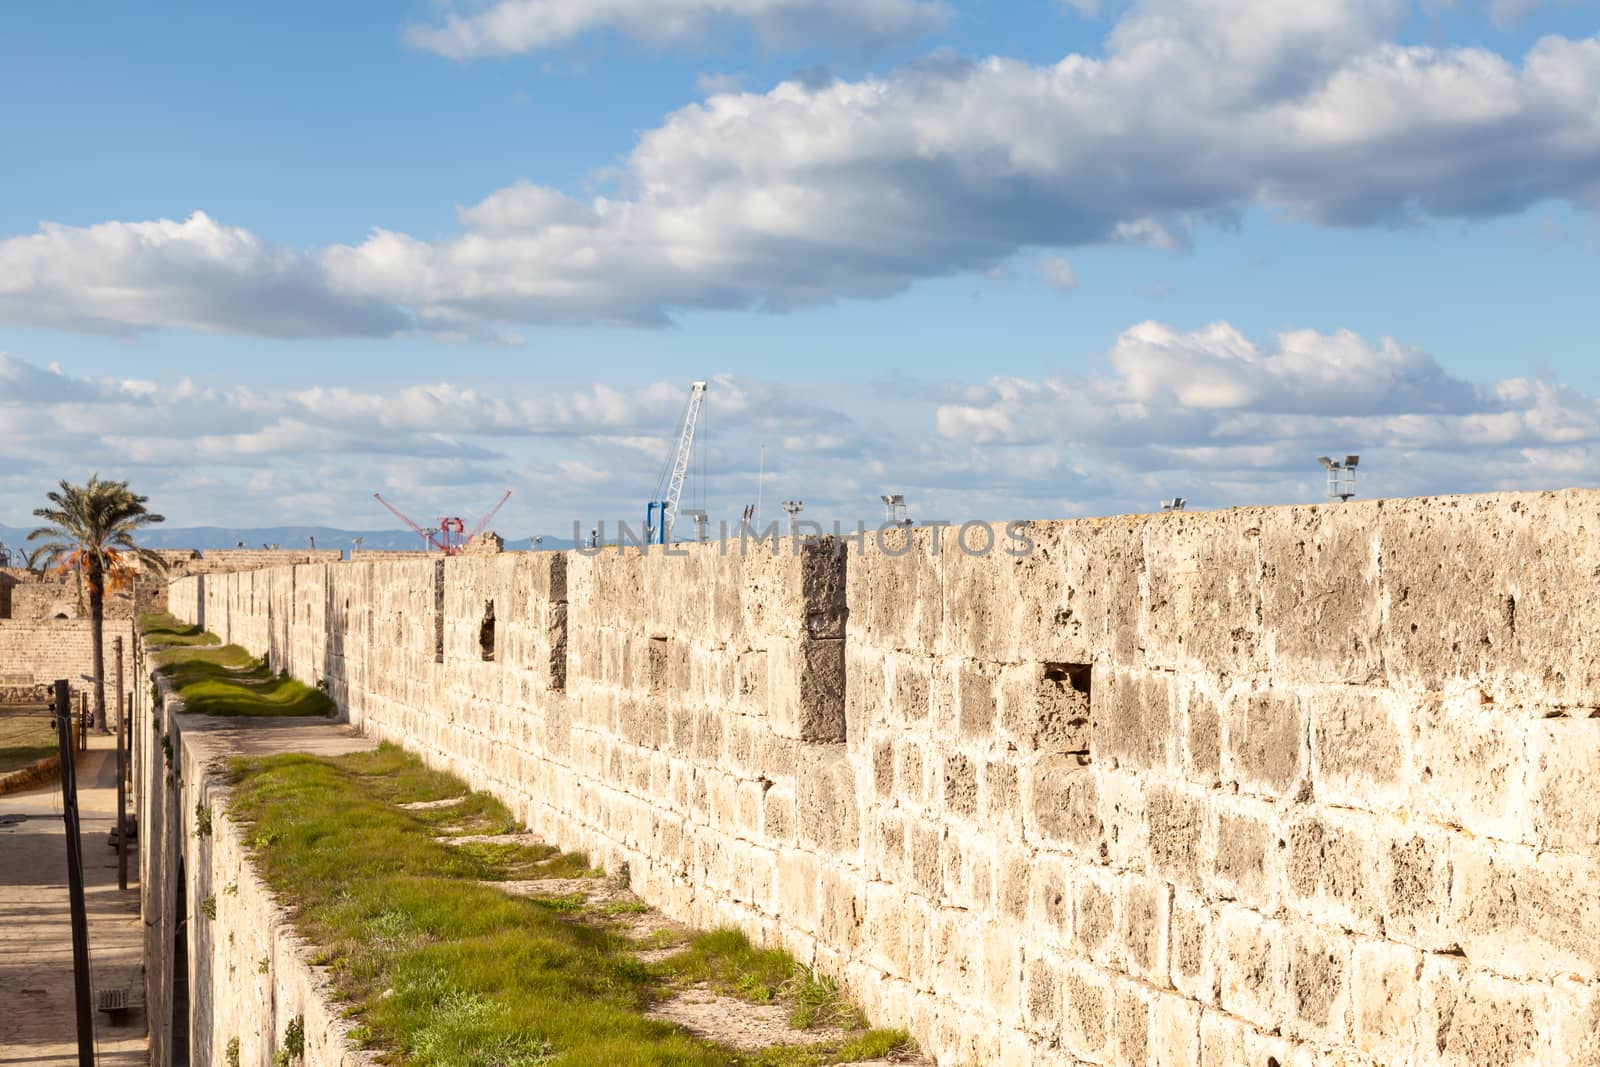 The defensive walls surrounding the historic city of Famagusta in the Turkish Republic of Northern Cyprus date back to the 15th century.